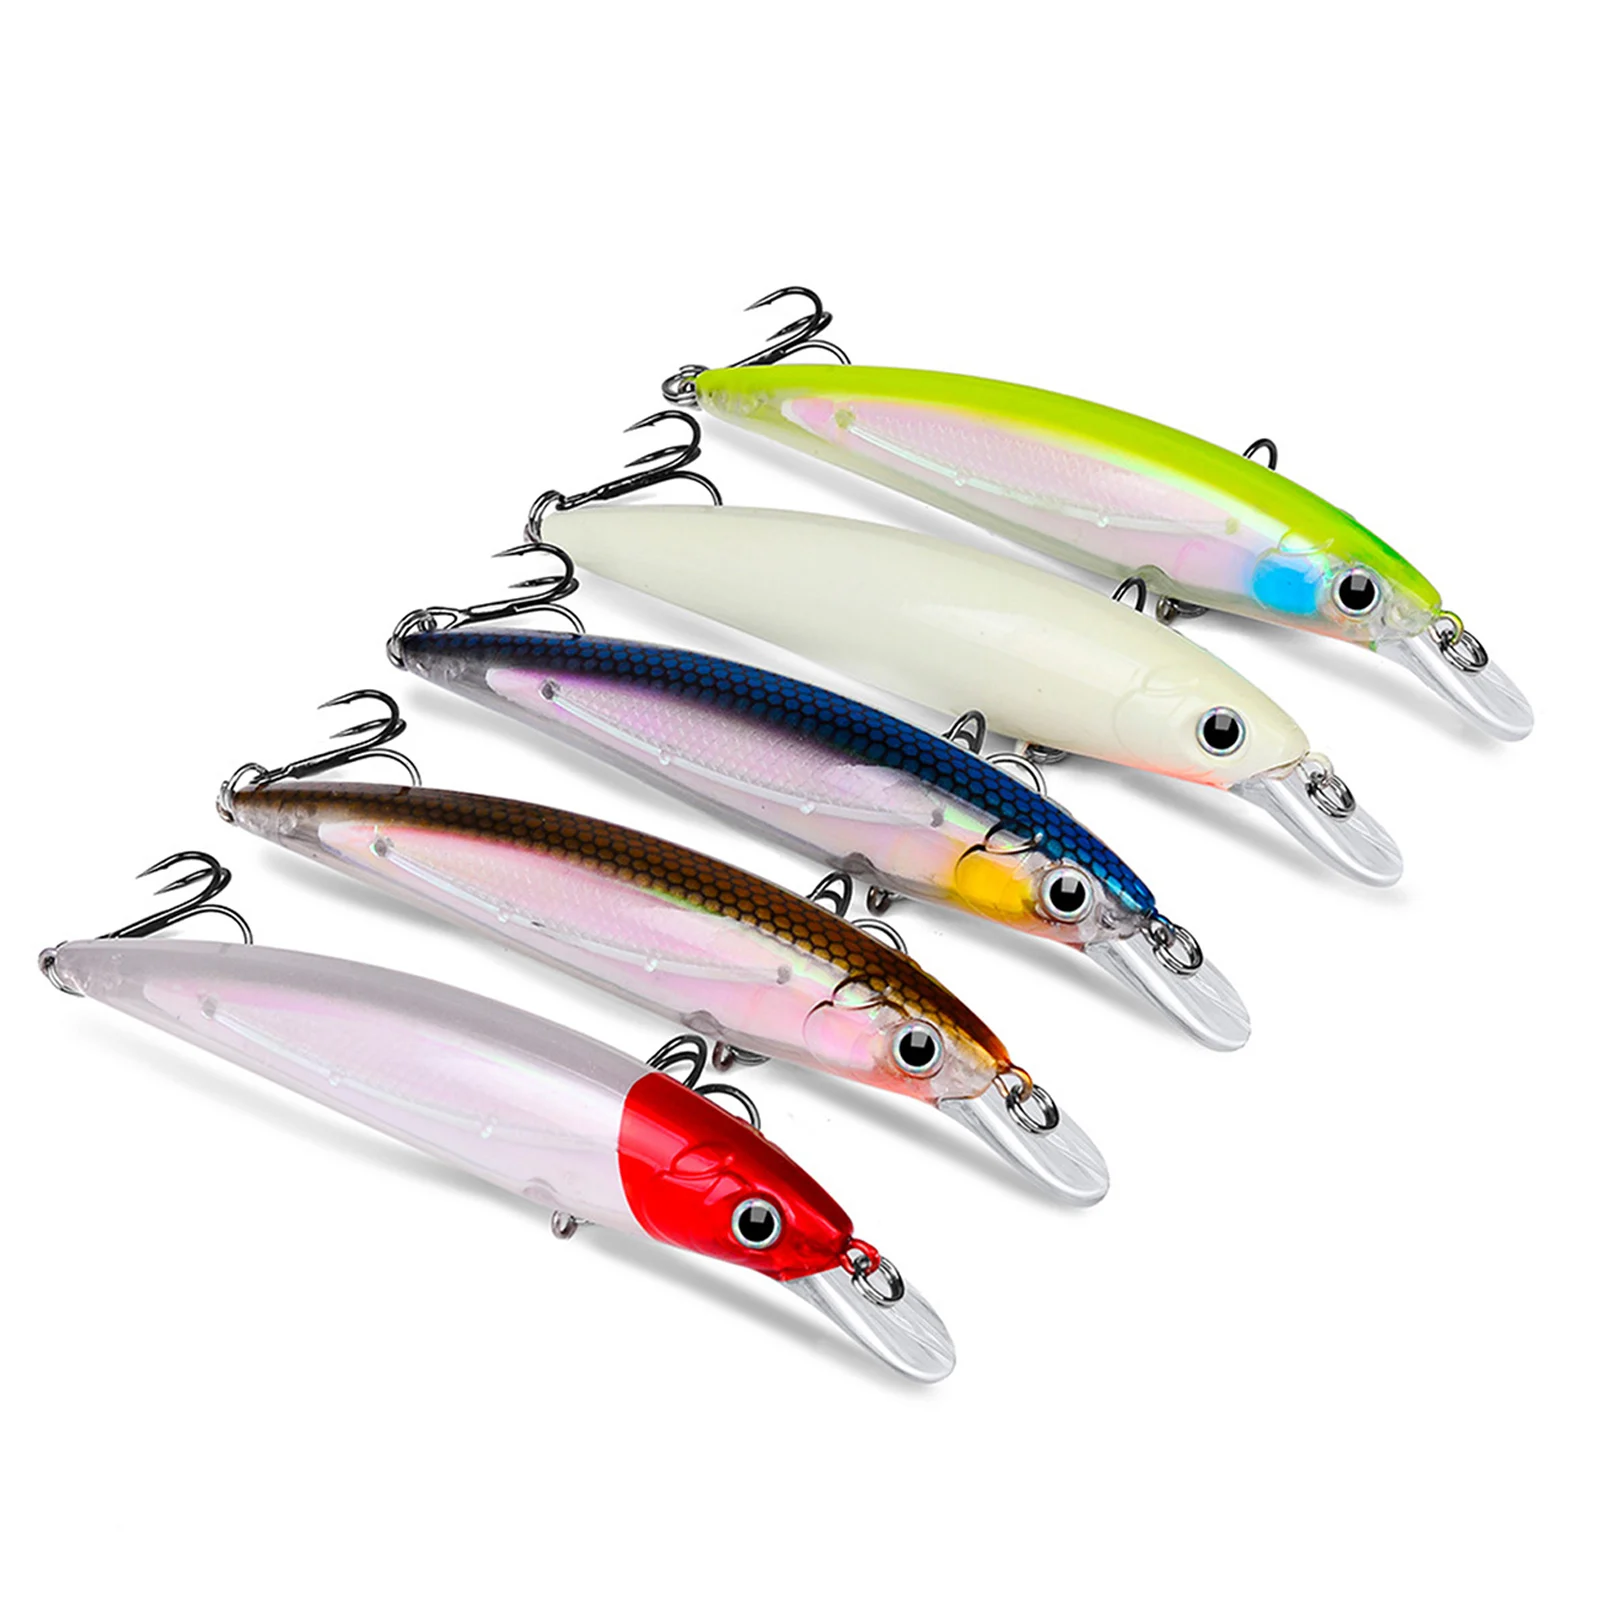 

Swimbaits Fishing Tackle Soft Plastic Lure Realistic Appearance for Outdoor Pond Fishing B2Cshop